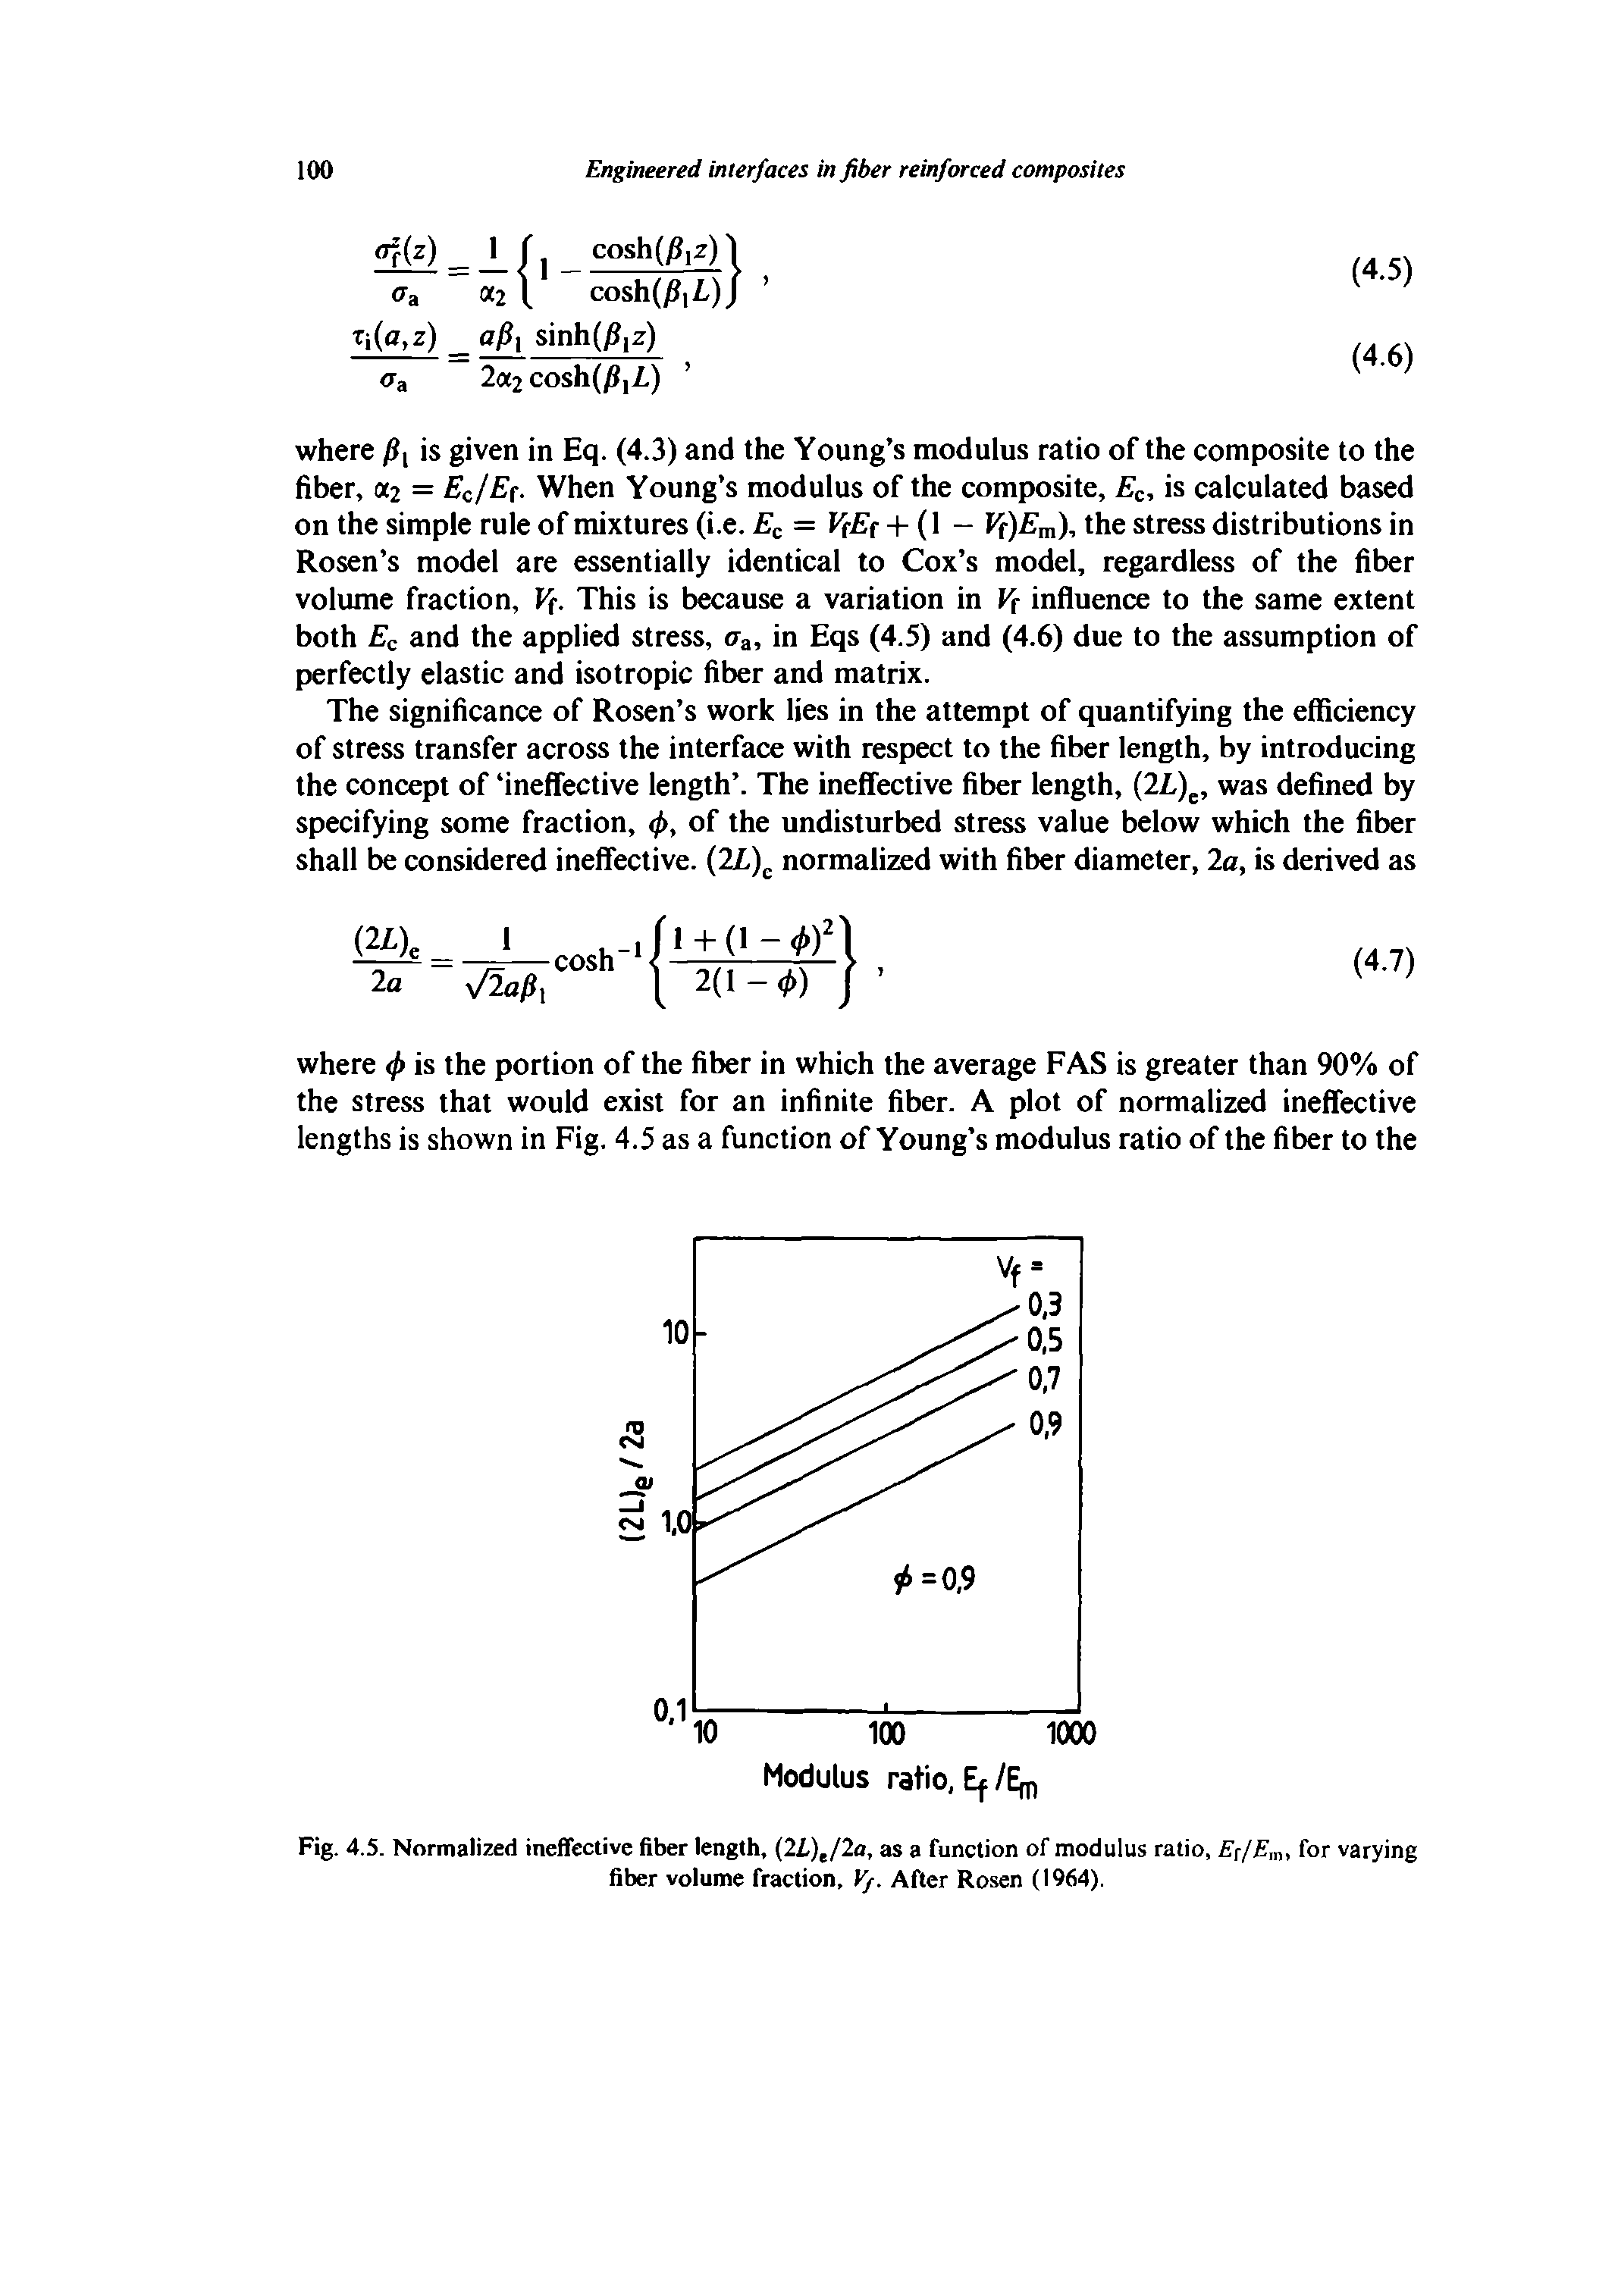 Fig. 4.5. Normalized ineffective fiber length, (2i),/2a, as a function of modulus ratio, E jEms for varying fiber volume fraction, Vf. After Rosen (1964).